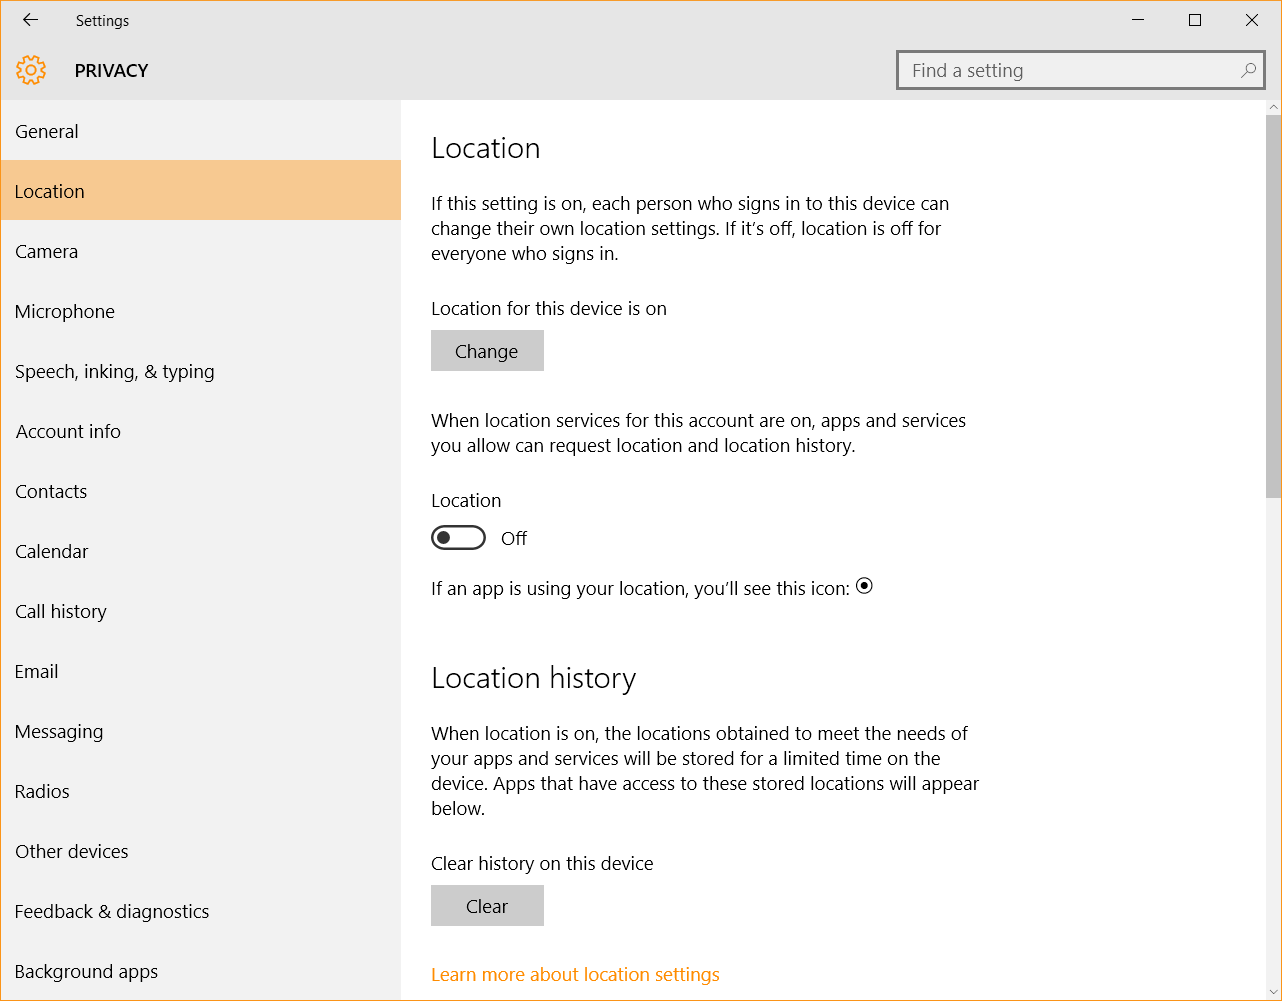 Windows 10 Security Guide - Location Privacy Settings